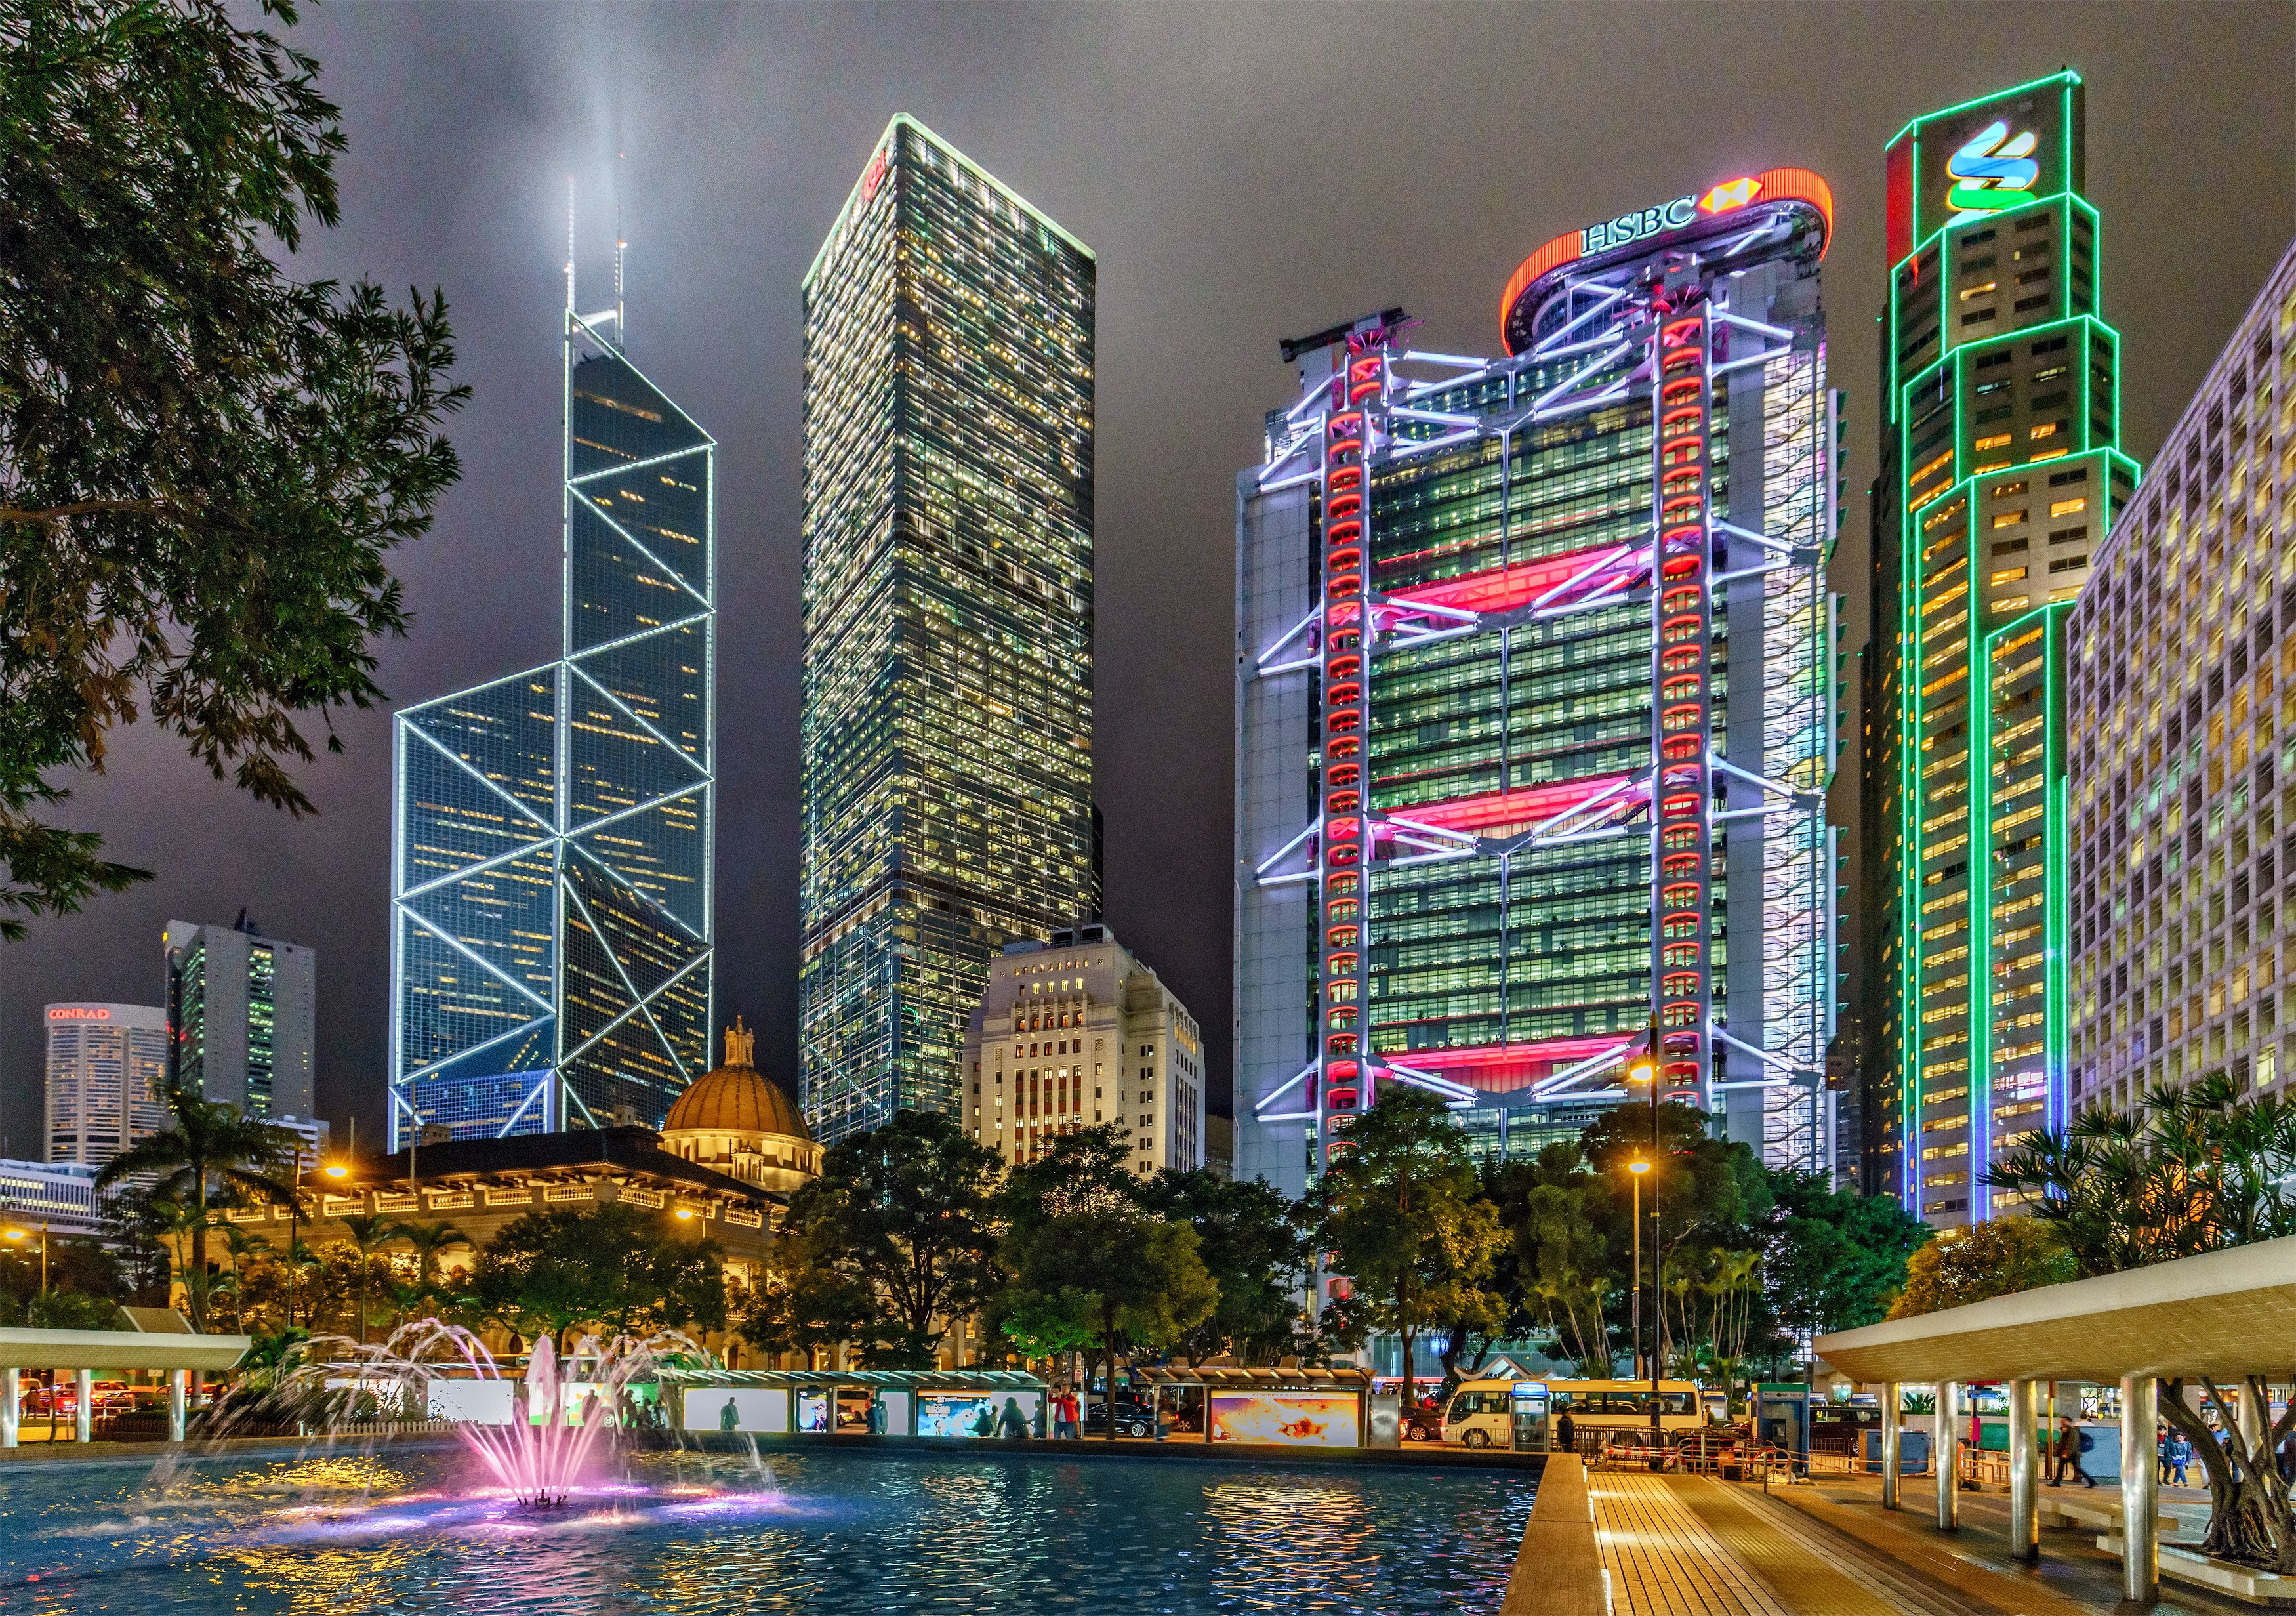 Hong Kong’s night cityscape in Central, with Bank of China Tower and HSBC Main Building seen from Cenotaph Square.Photo: Shutterstock